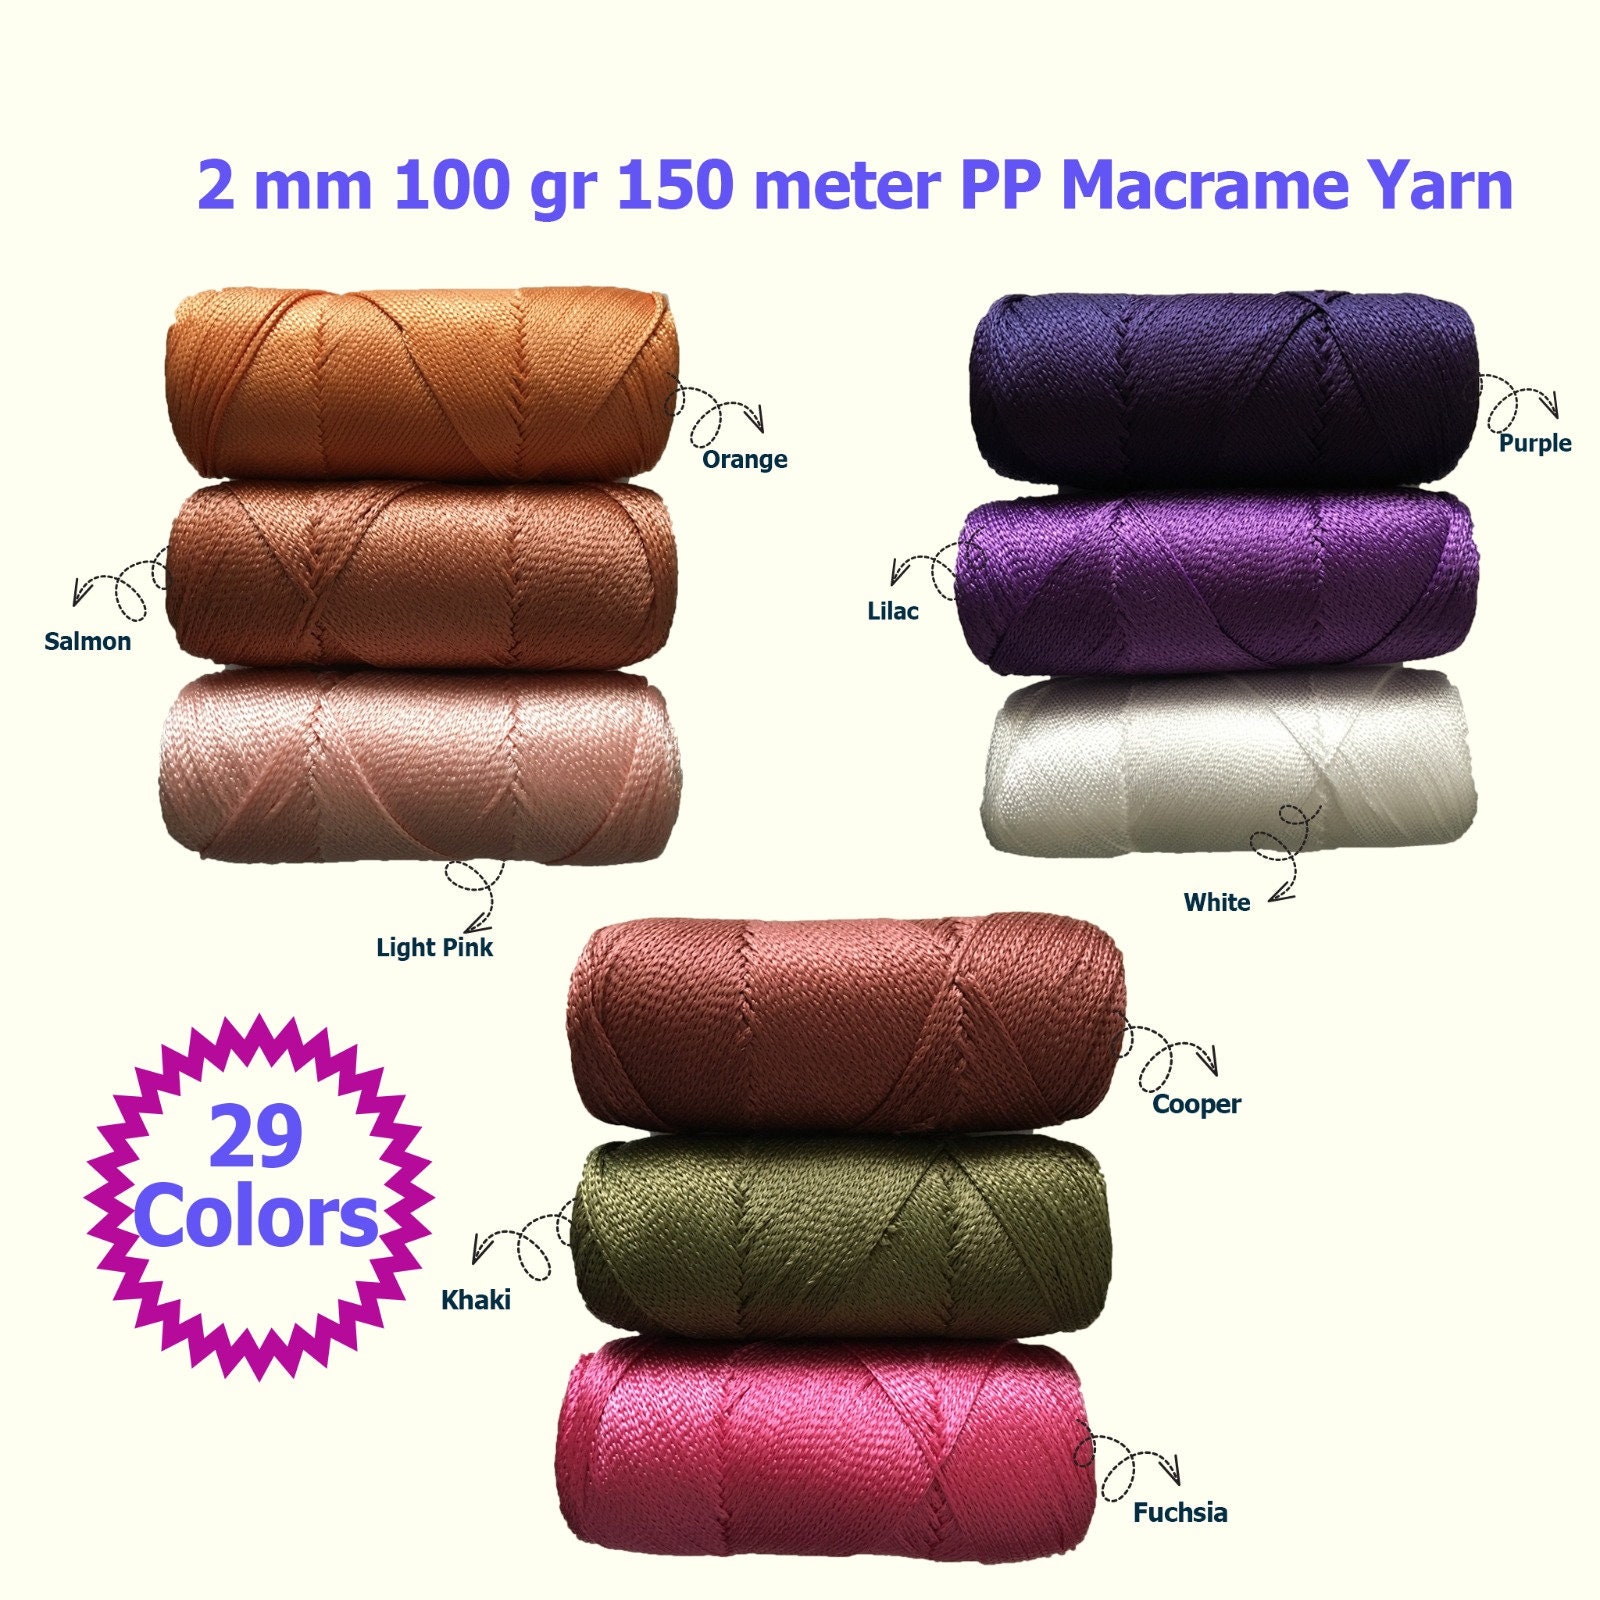 Crochet Rope 3 Mm, Macrame Cord, Polyester Yarn for DIY Projects